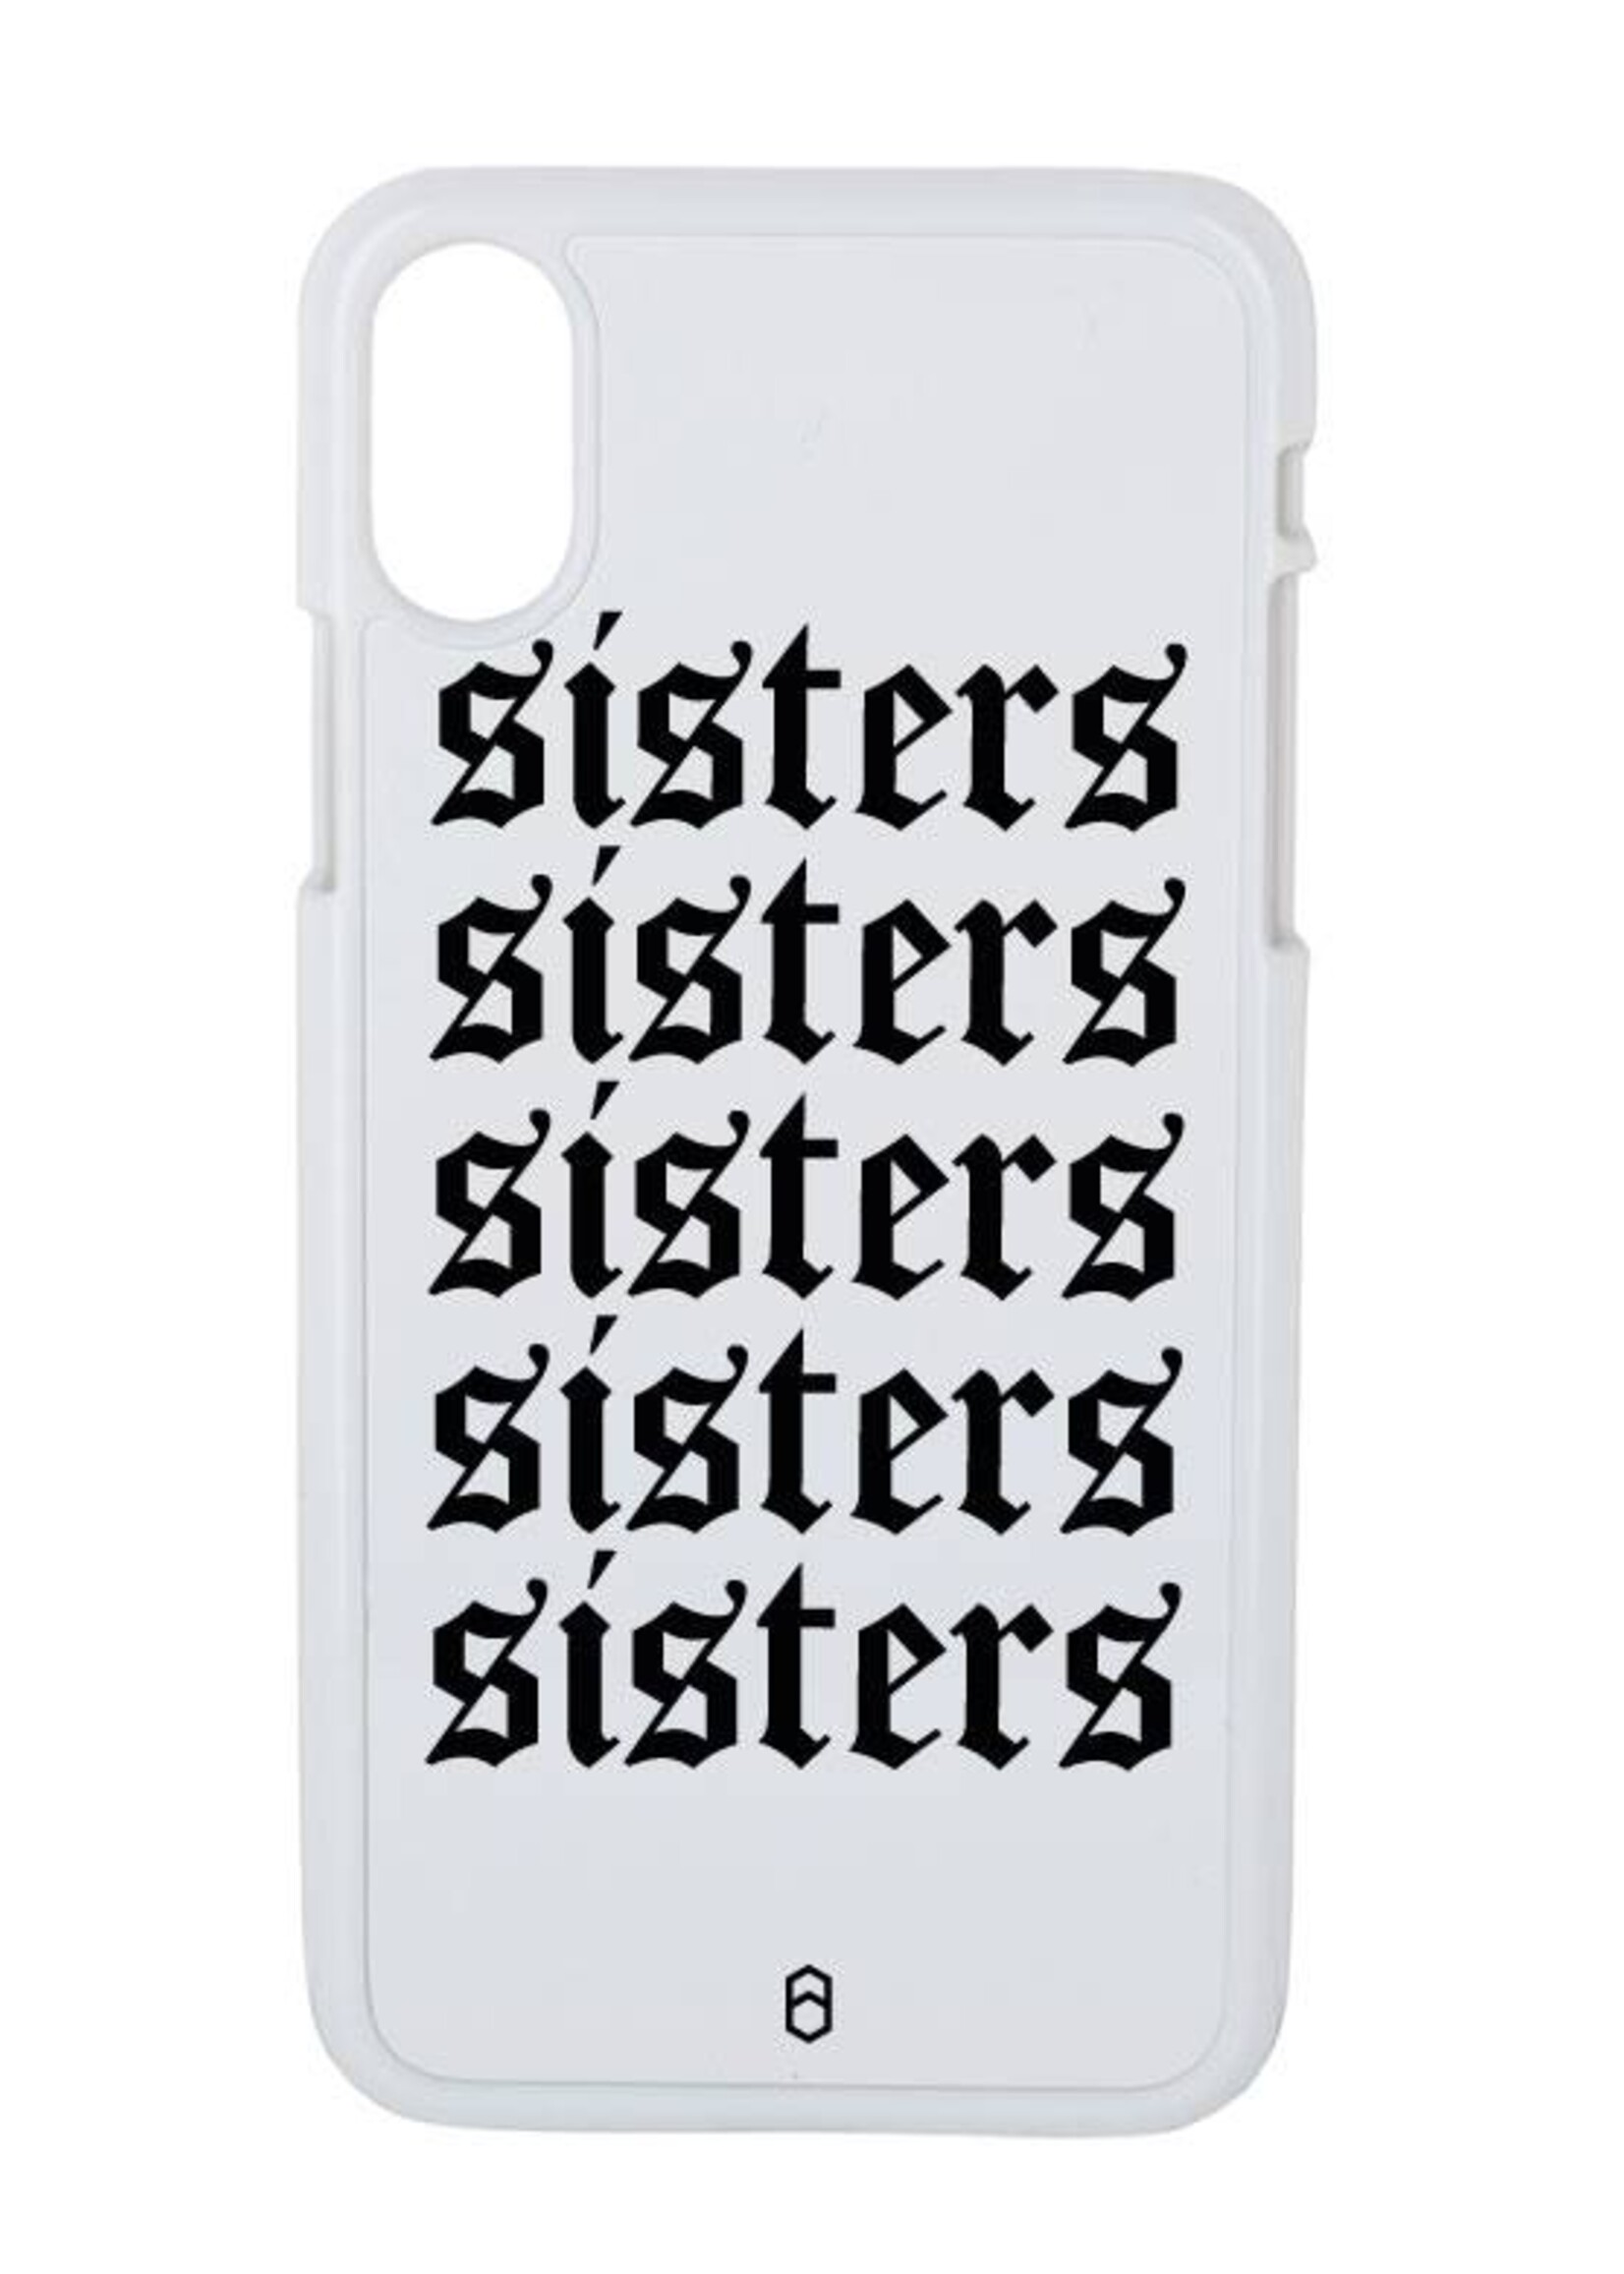 SISTERS 5 BFF CASE